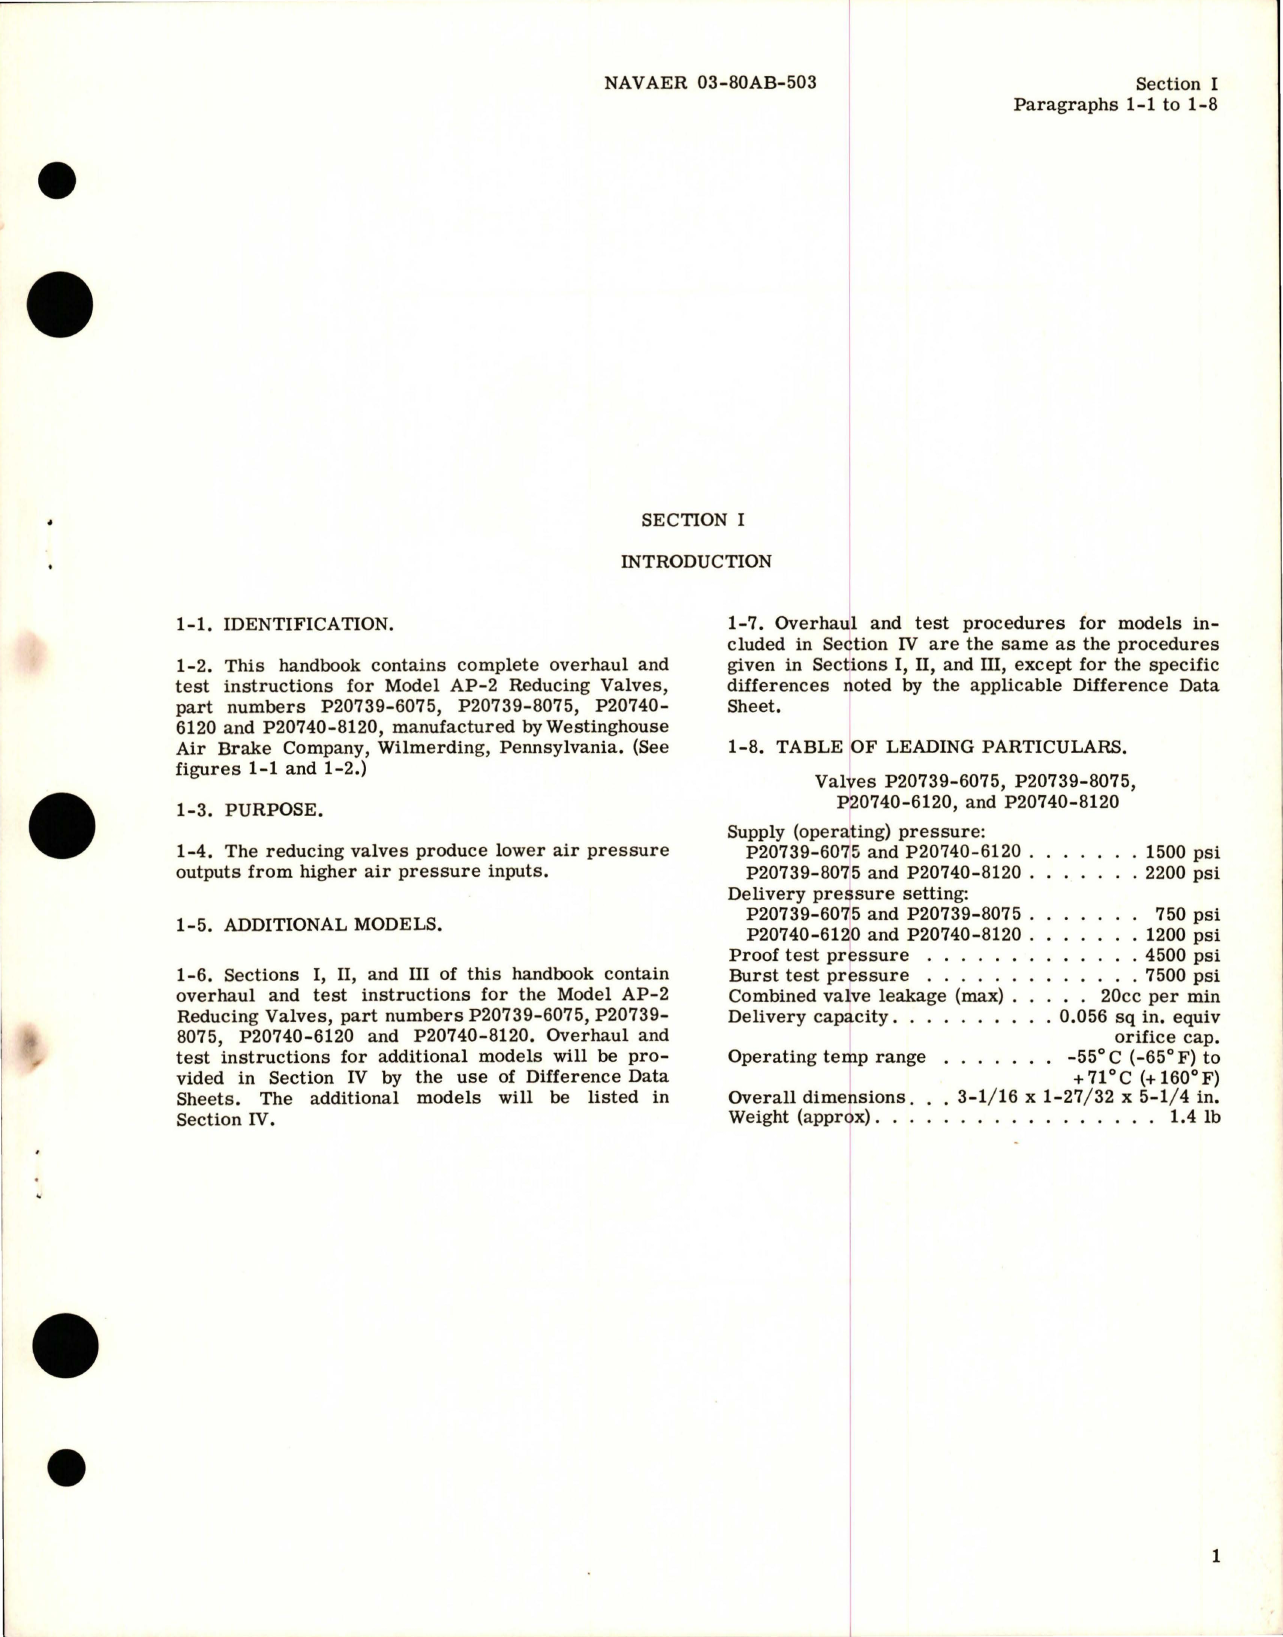 Sample page 5 from AirCorps Library document: Overhaul Instructions for Reducing Valve